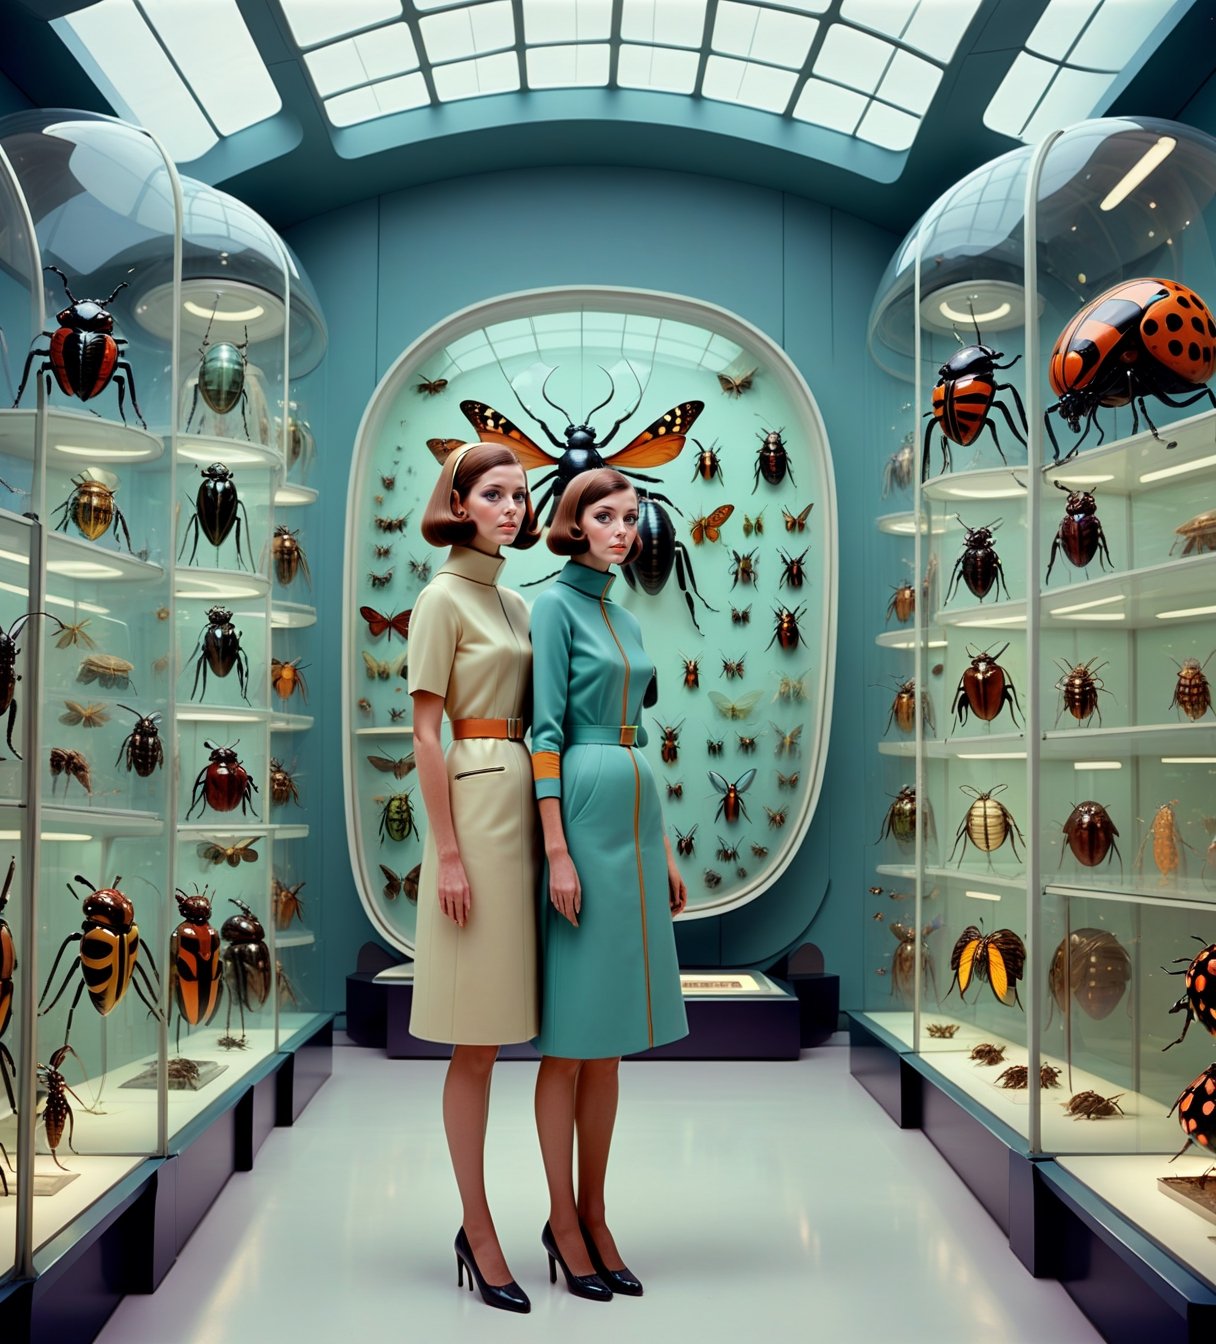 Woman, 1960s style clothing, standing in front of futuristic, space age, glass cases displaying collection of very large insects, beetles, spiders, butterflies, art by Wes Anderson